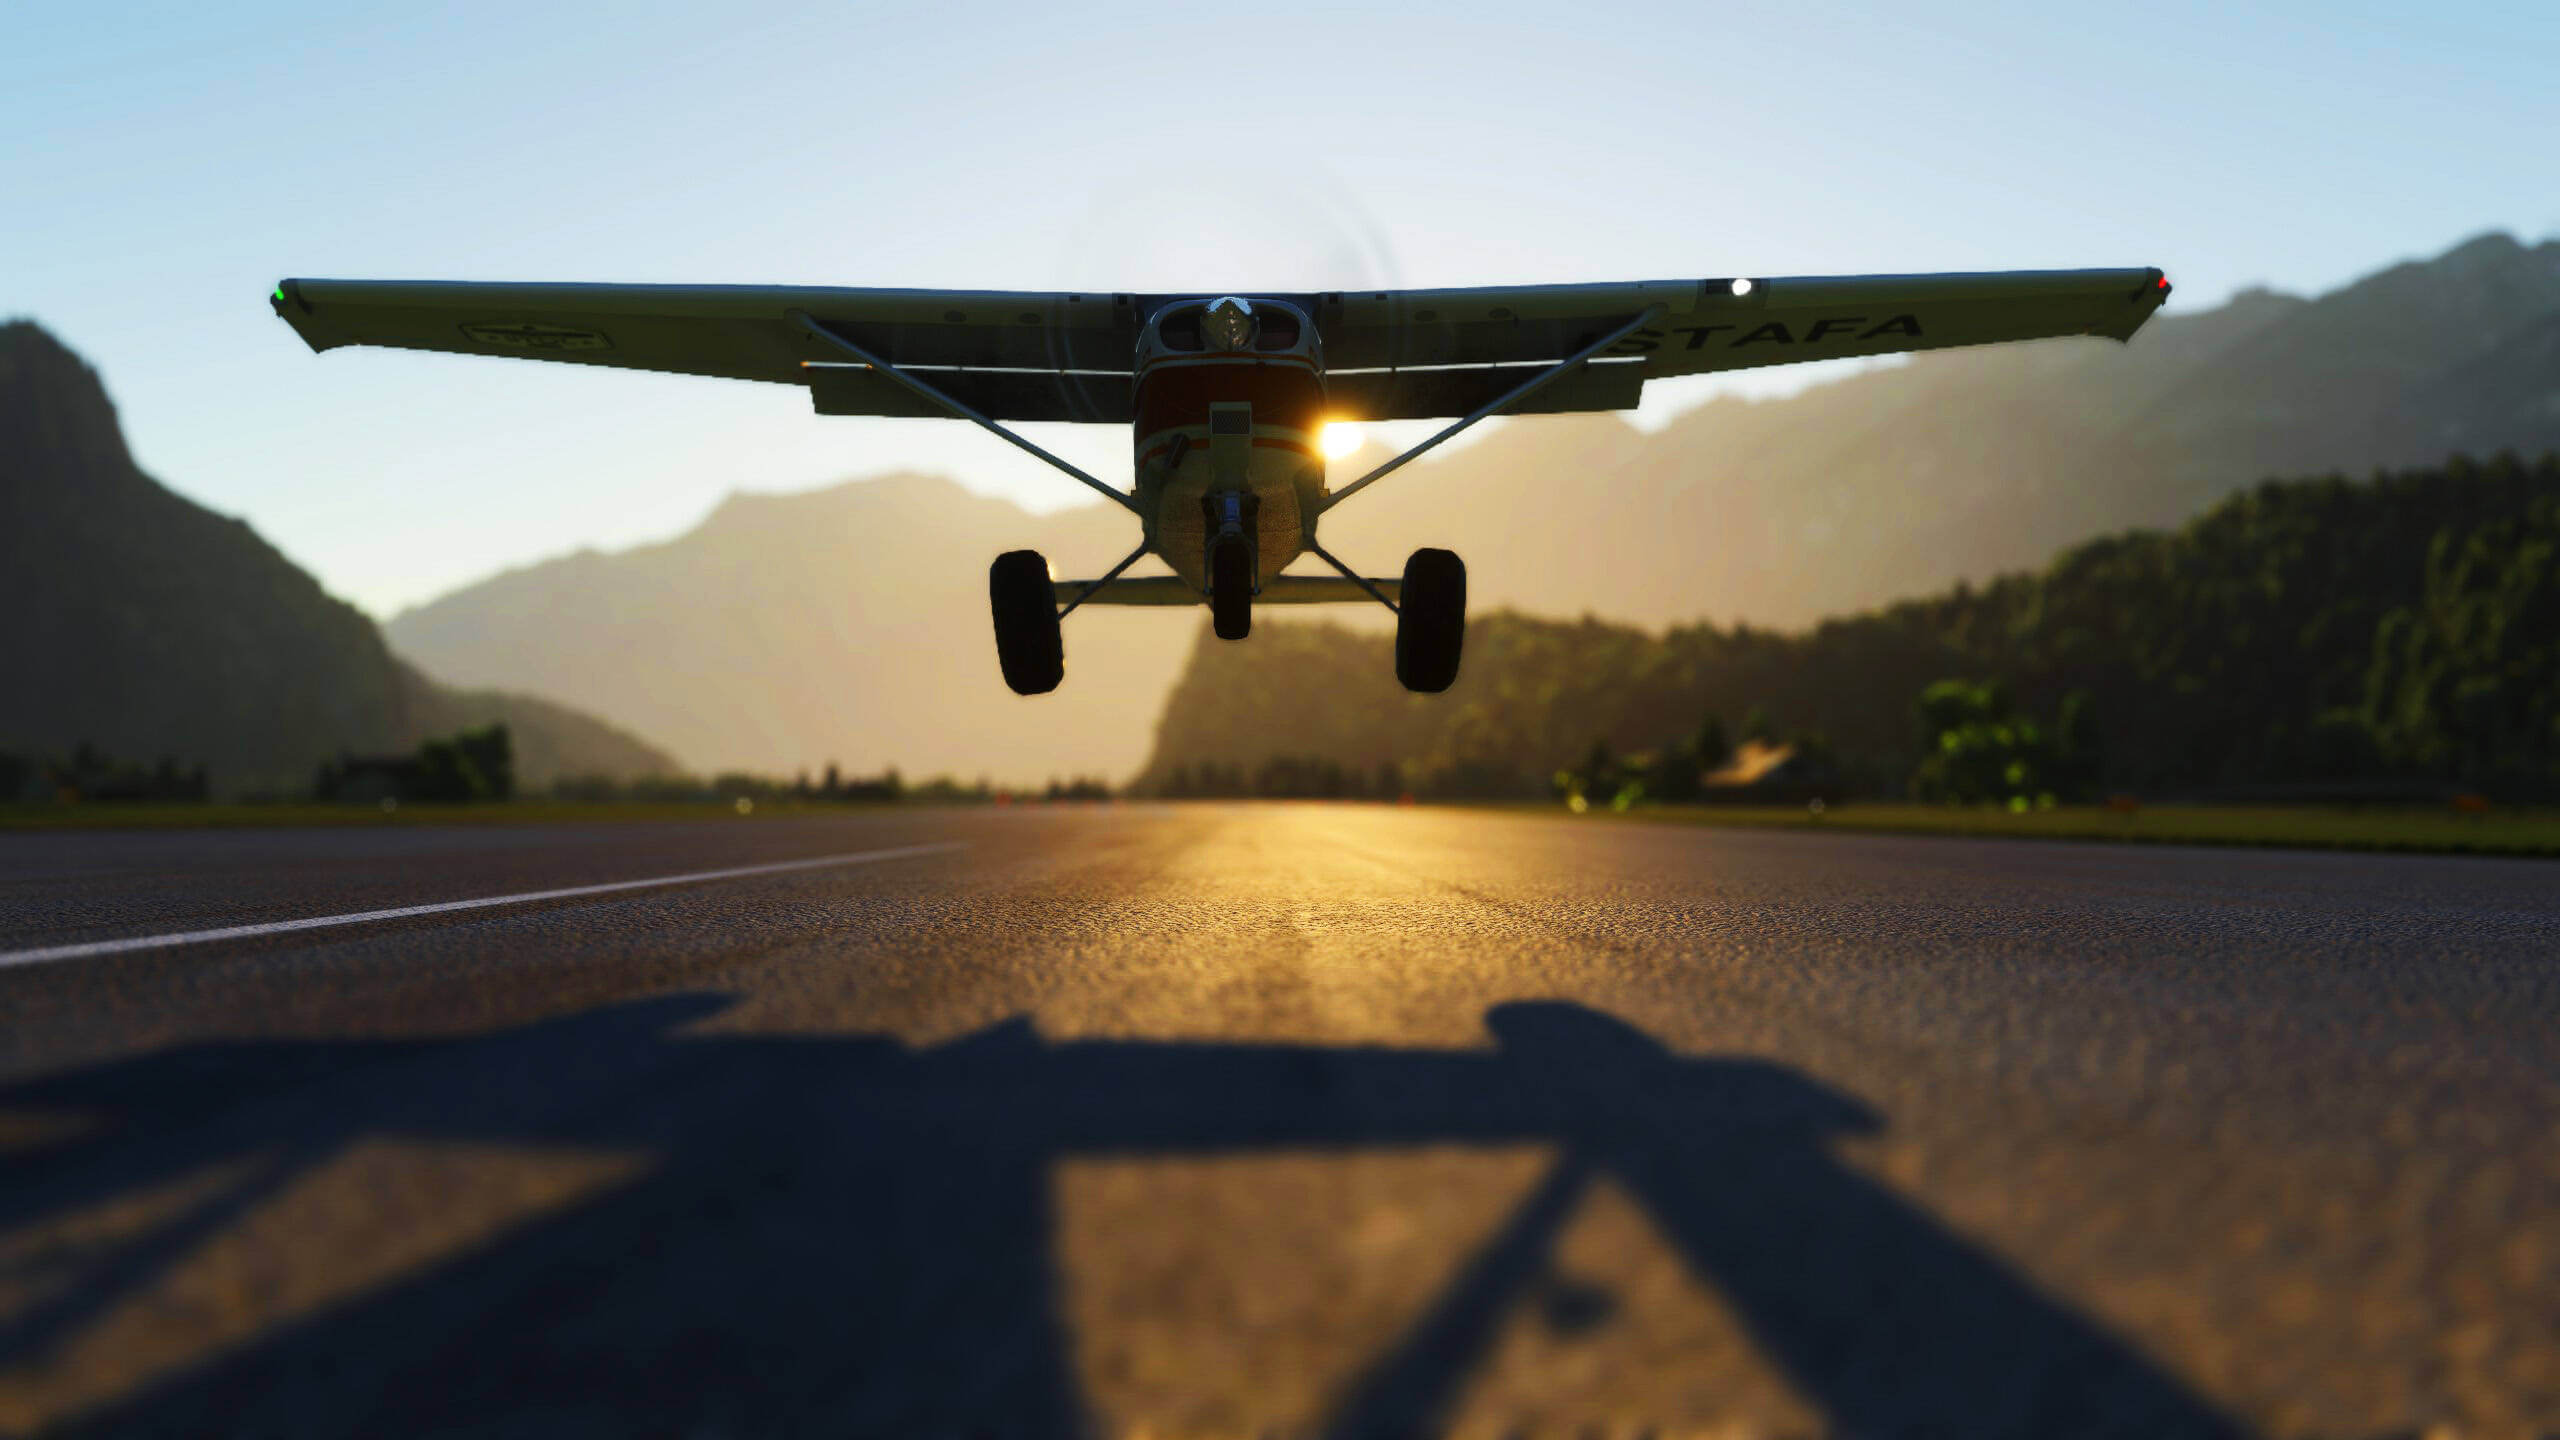 A Cessna 152 moments from touch down with flaps extended and the sun just visible through a wing strut behind.